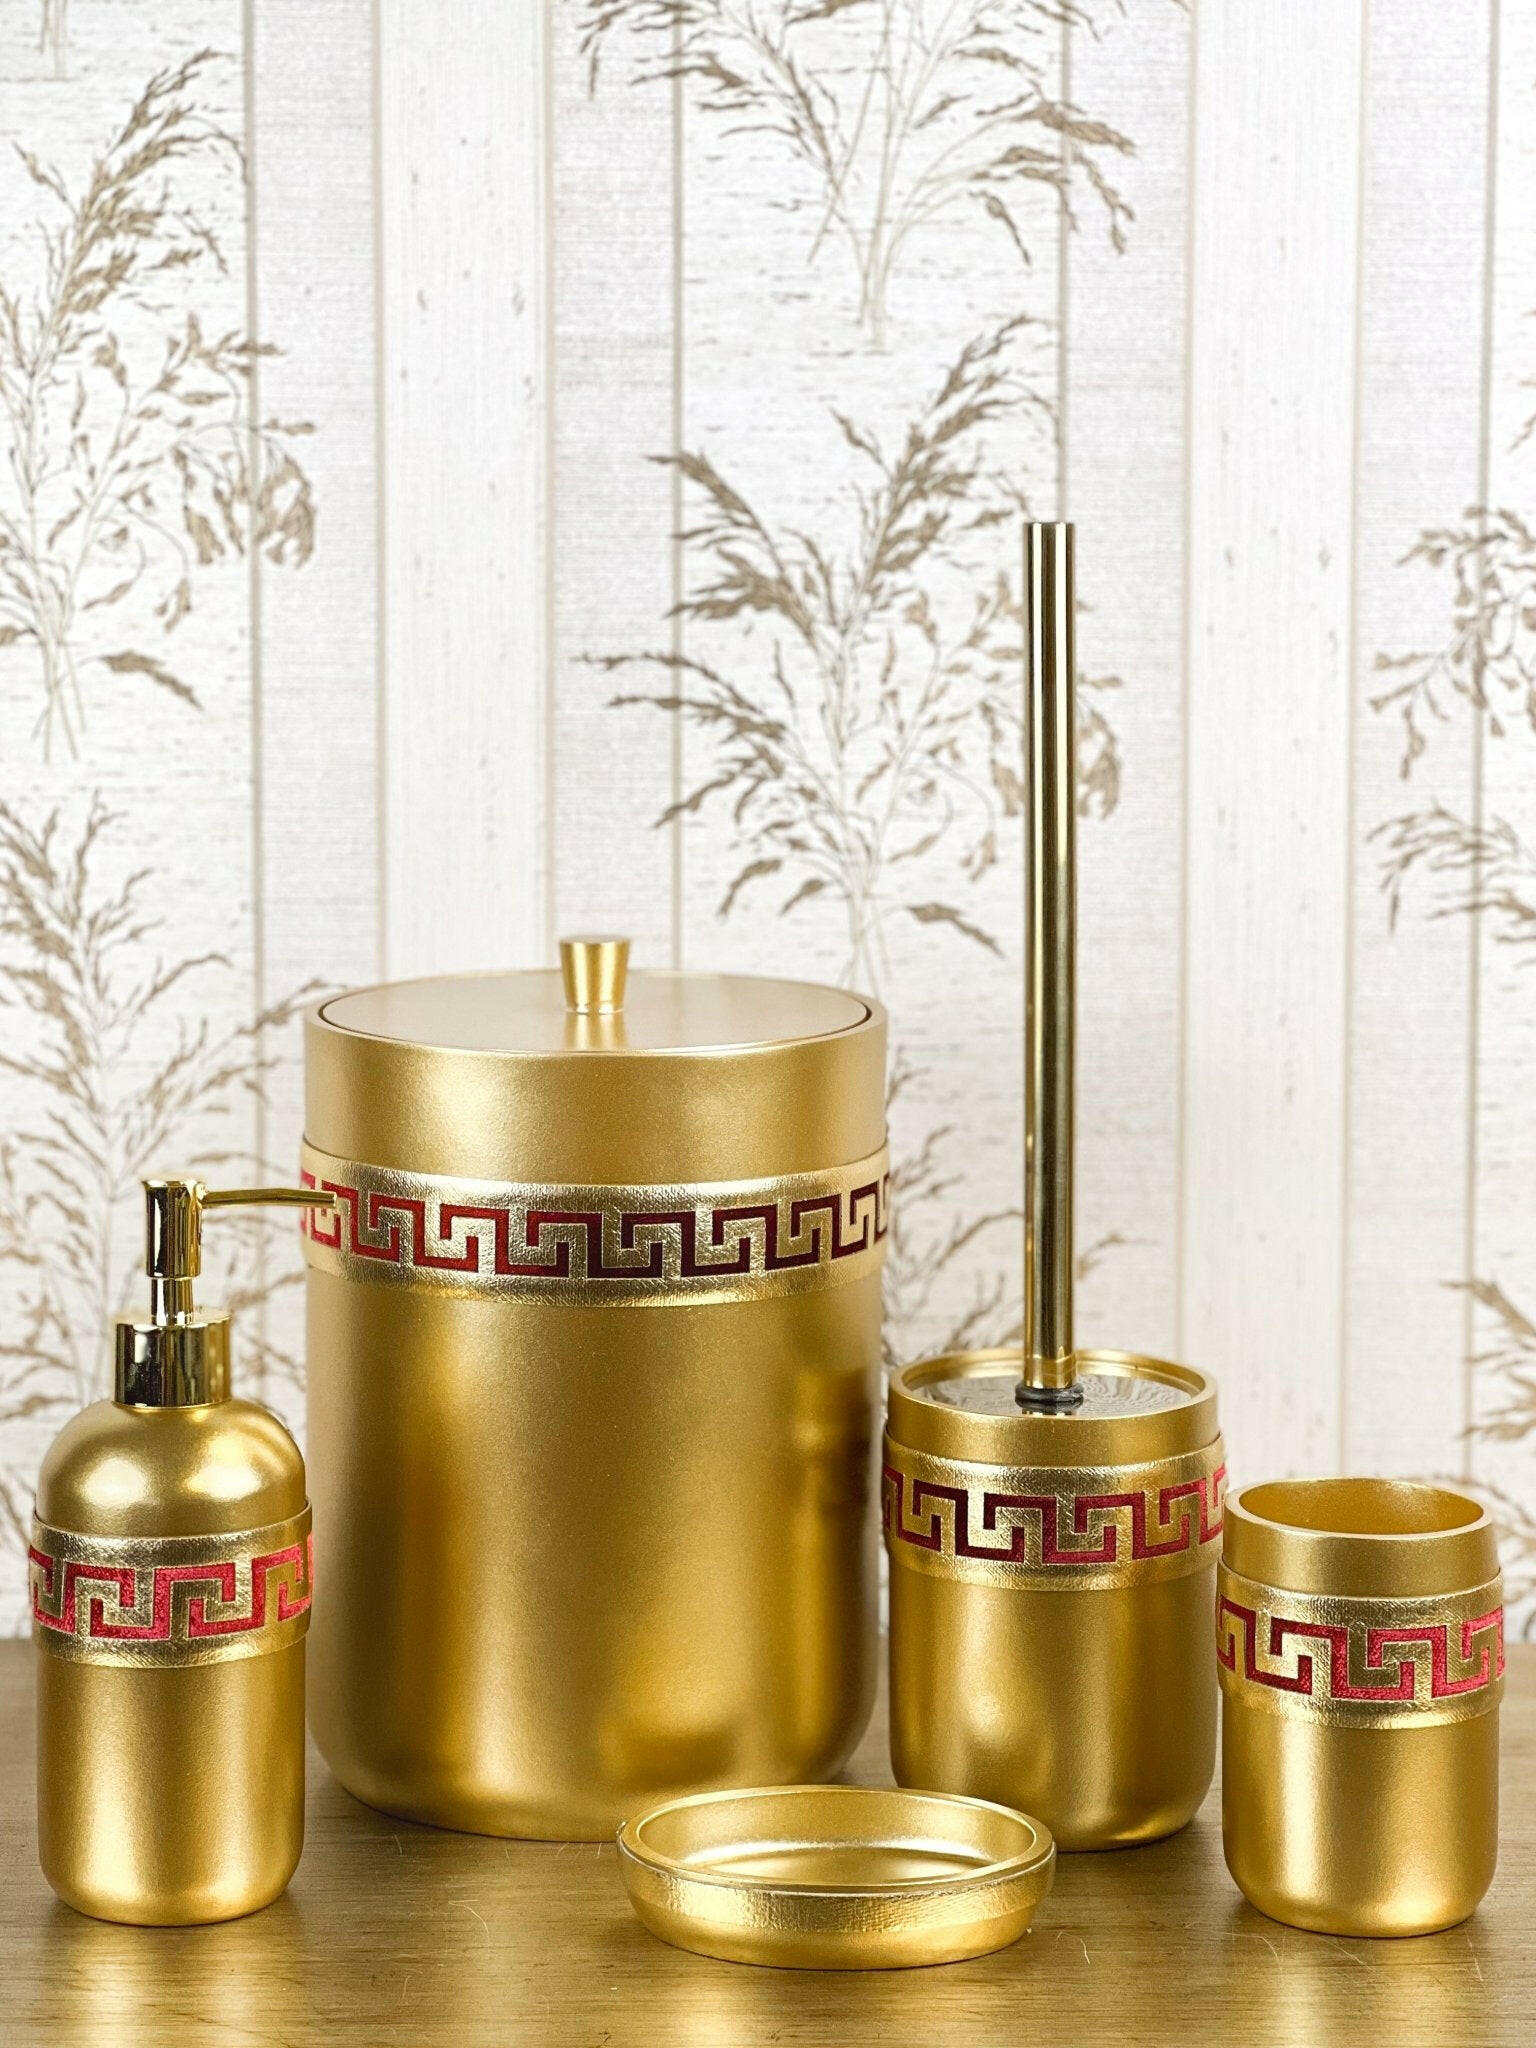 Gold Bathroom Accessories - Foter